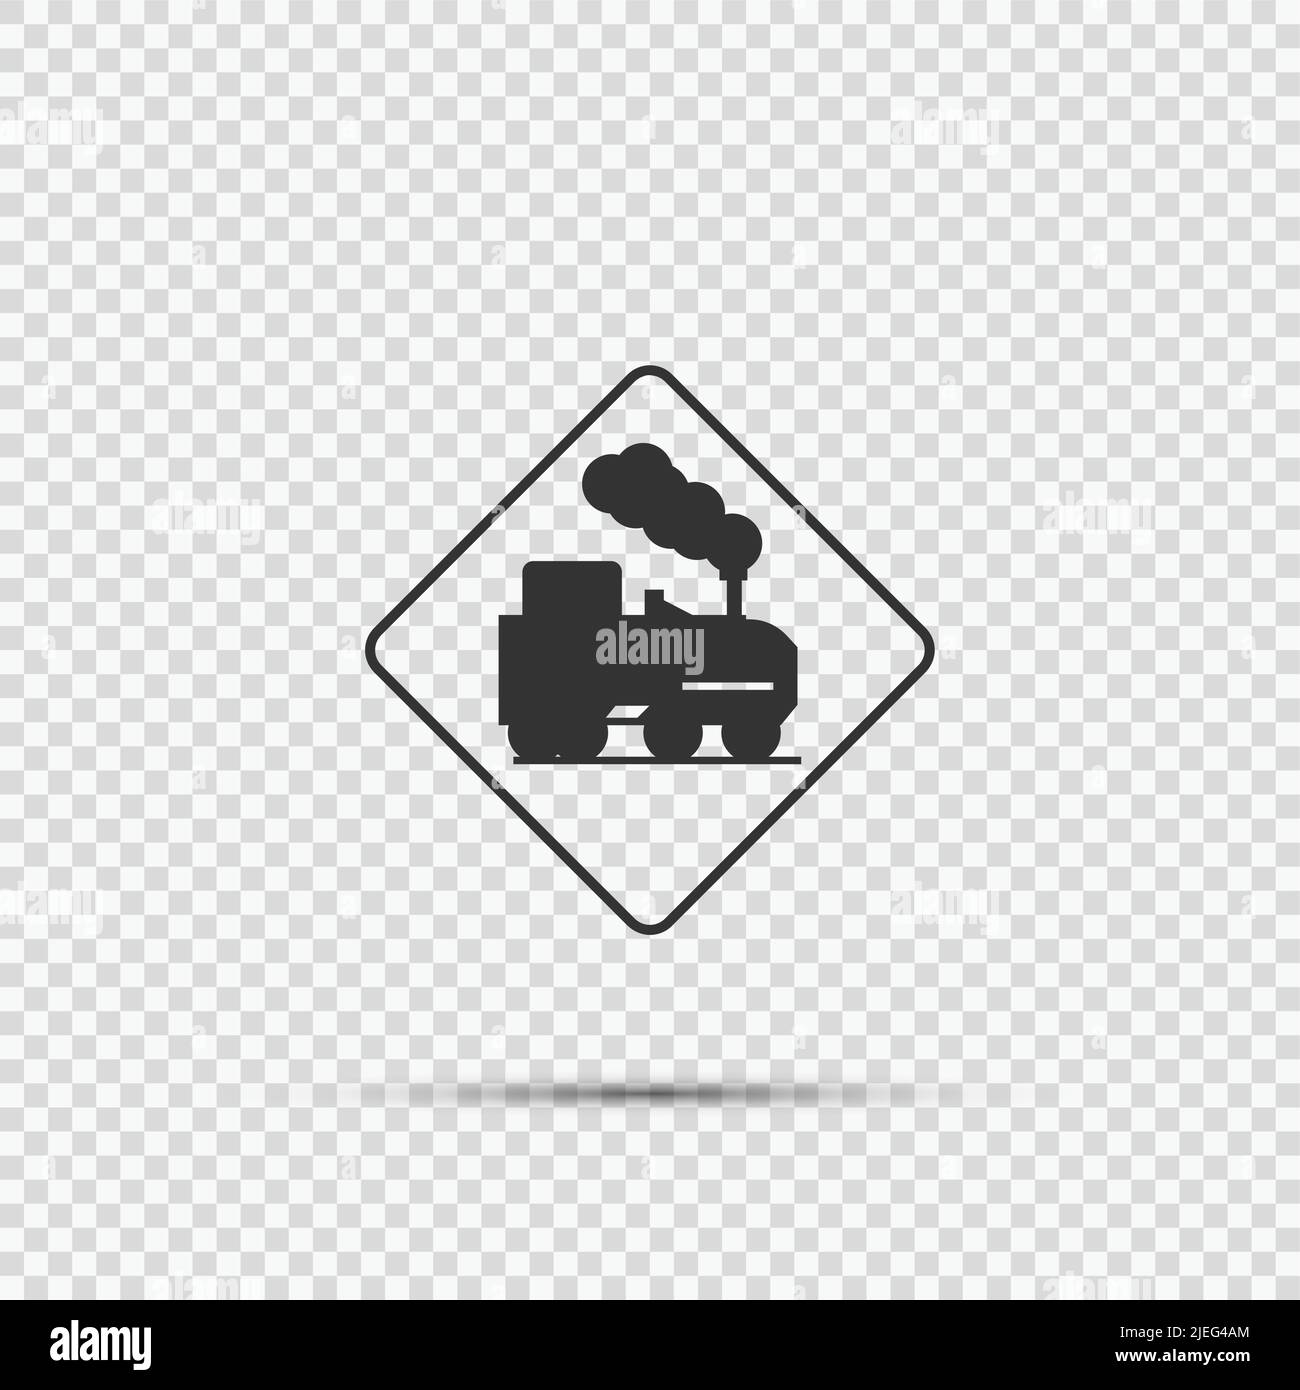 Open railroad crossing sign on transparent background,vector illustration Stock Vector